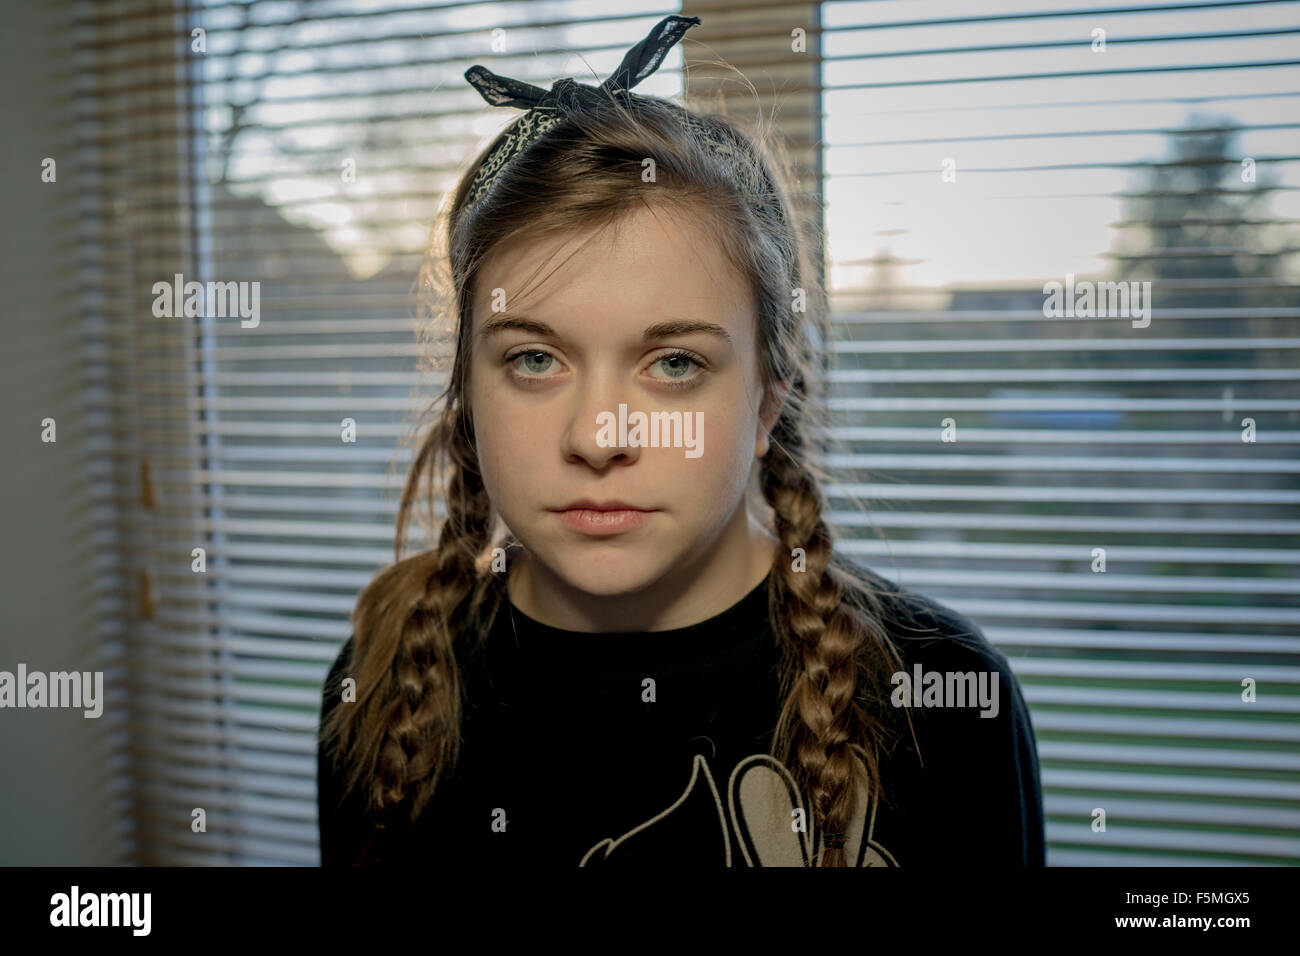 Head and shoulder photograph of a moody teenage girl Stock Photo